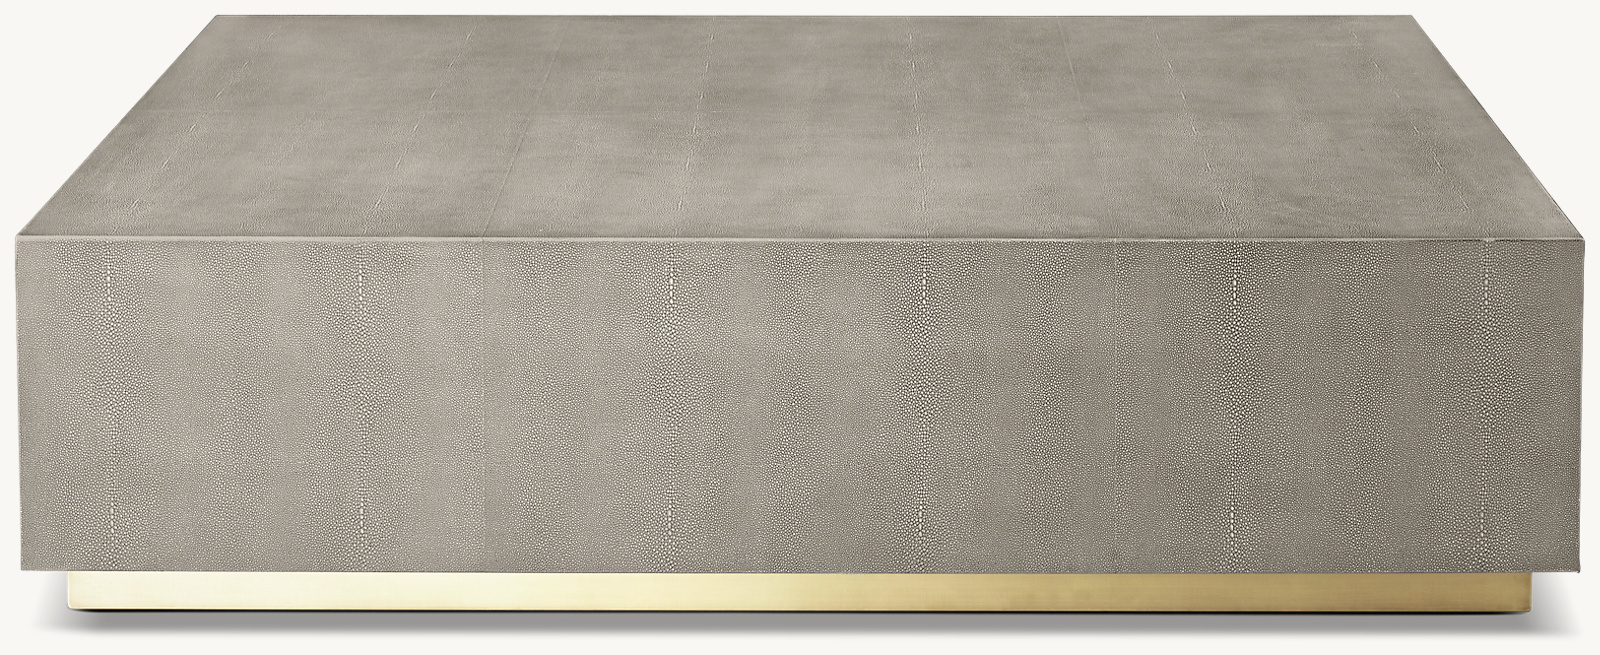 Square table shown in Fog Shagreen/Solid Burnished Brass.